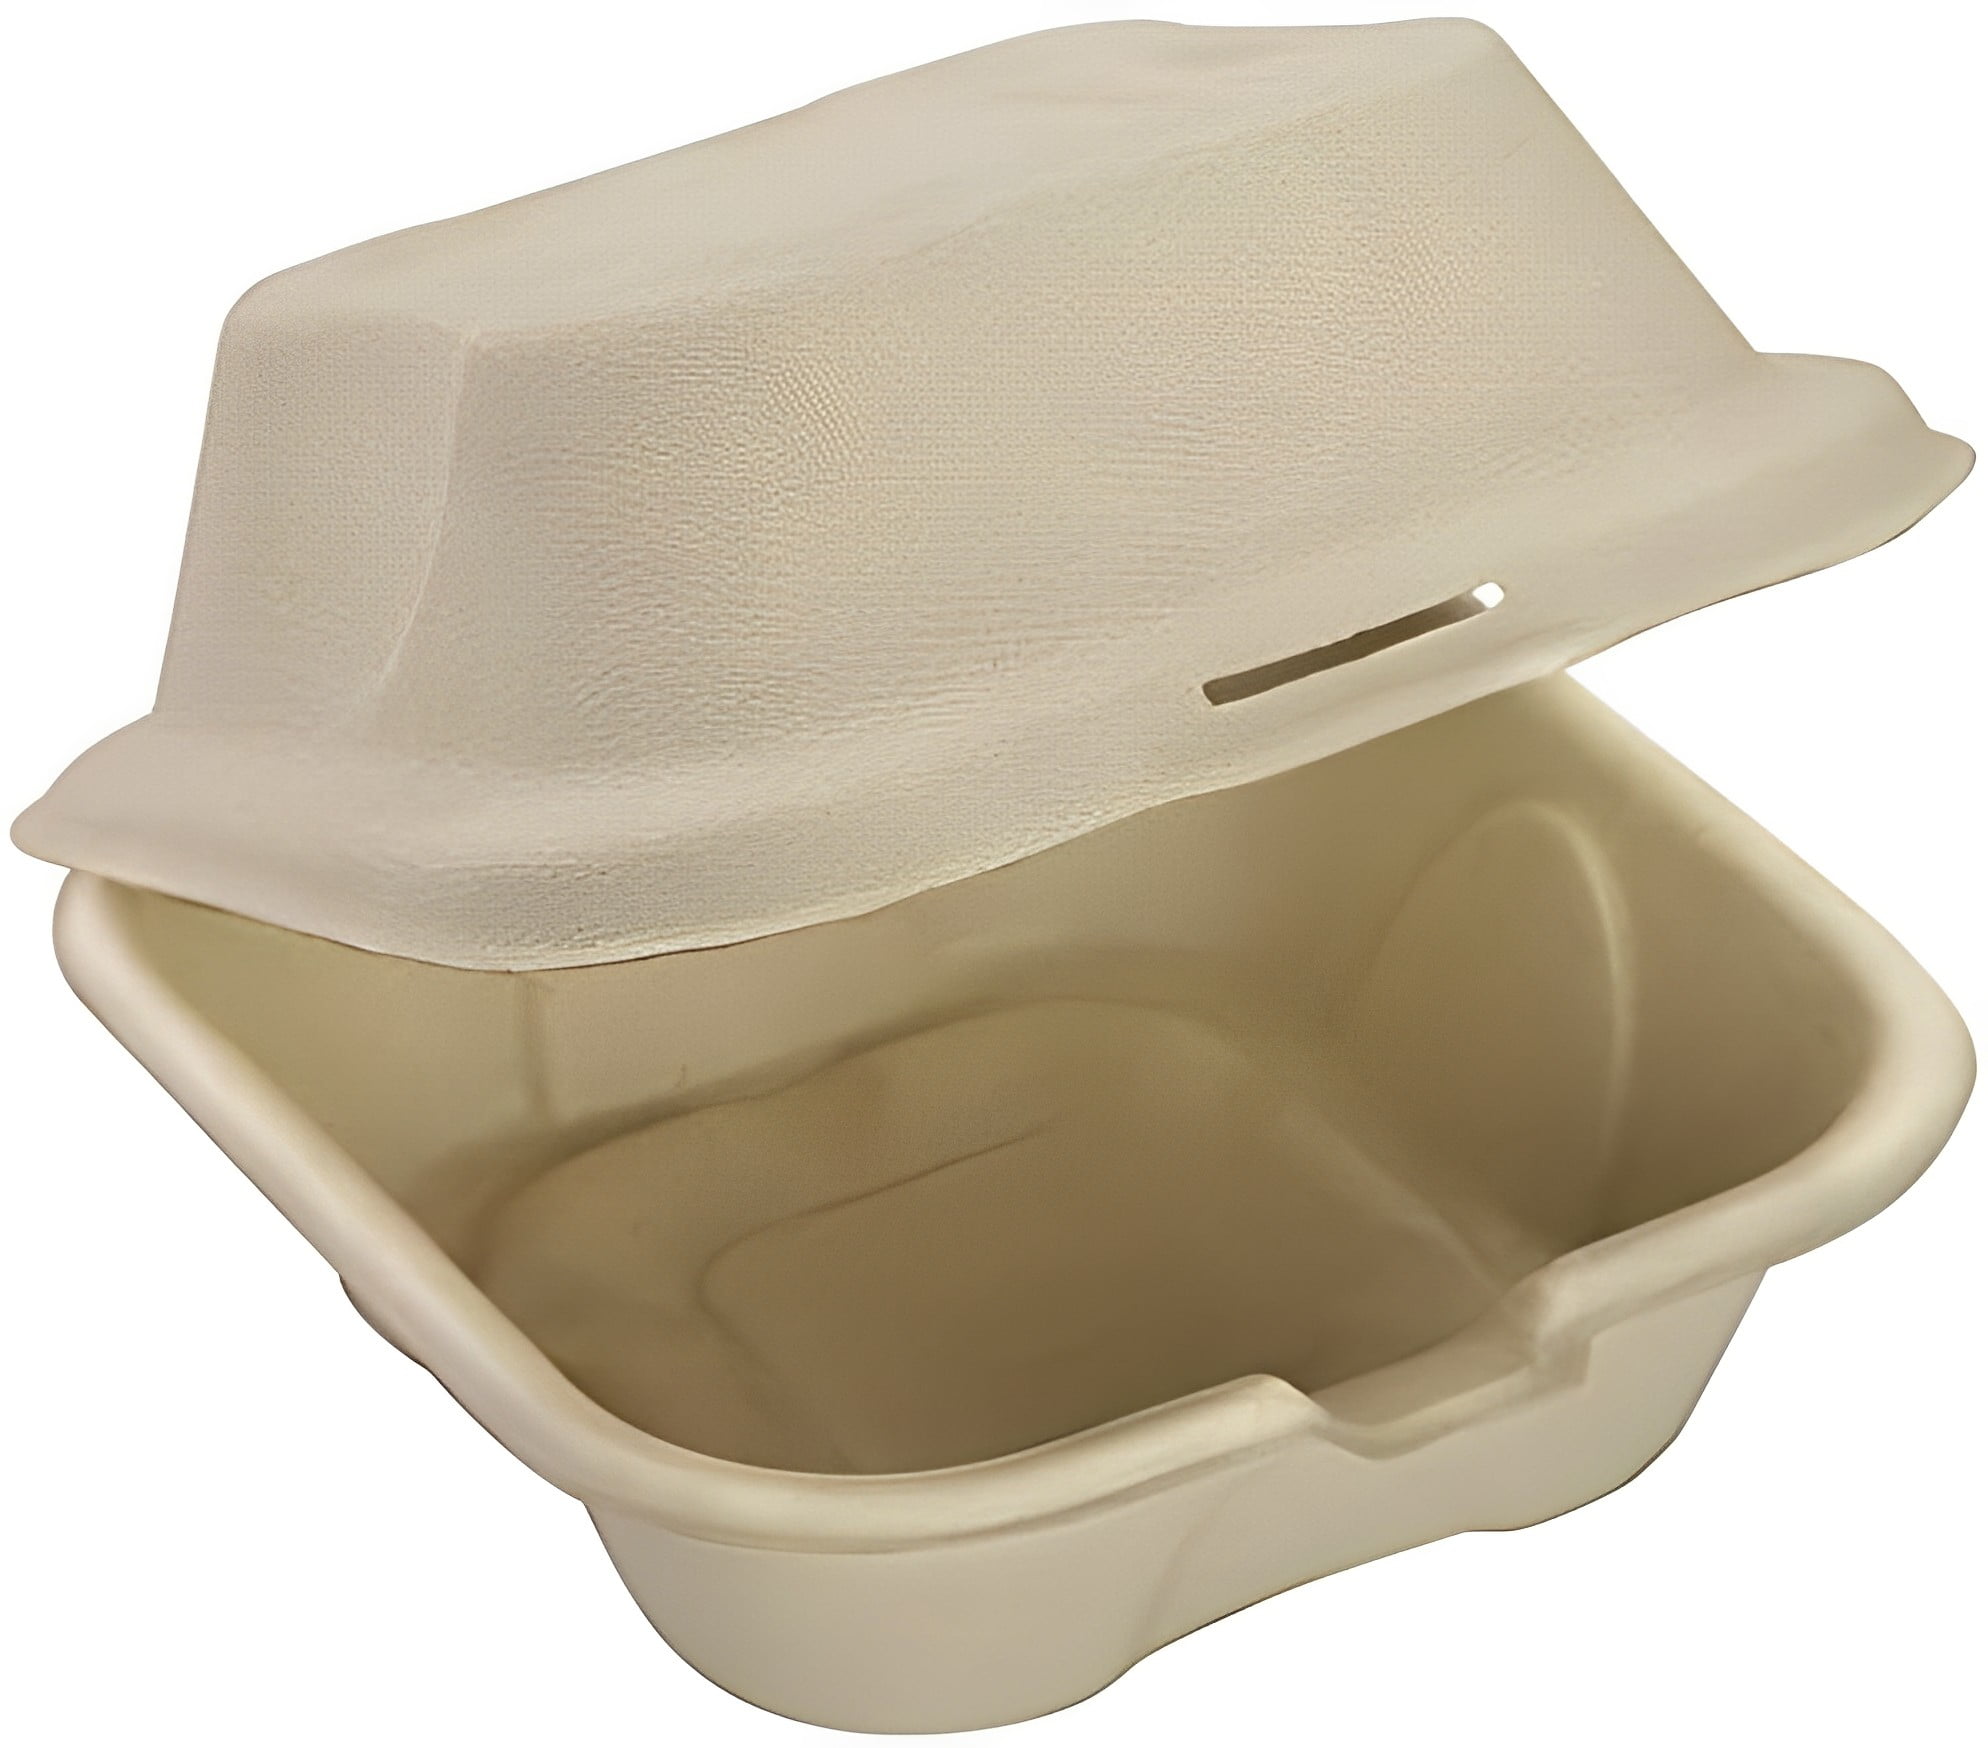 Stock Your Home Plastic 5 x 5 Inch Clamshell Takeout Trays (25 Count)